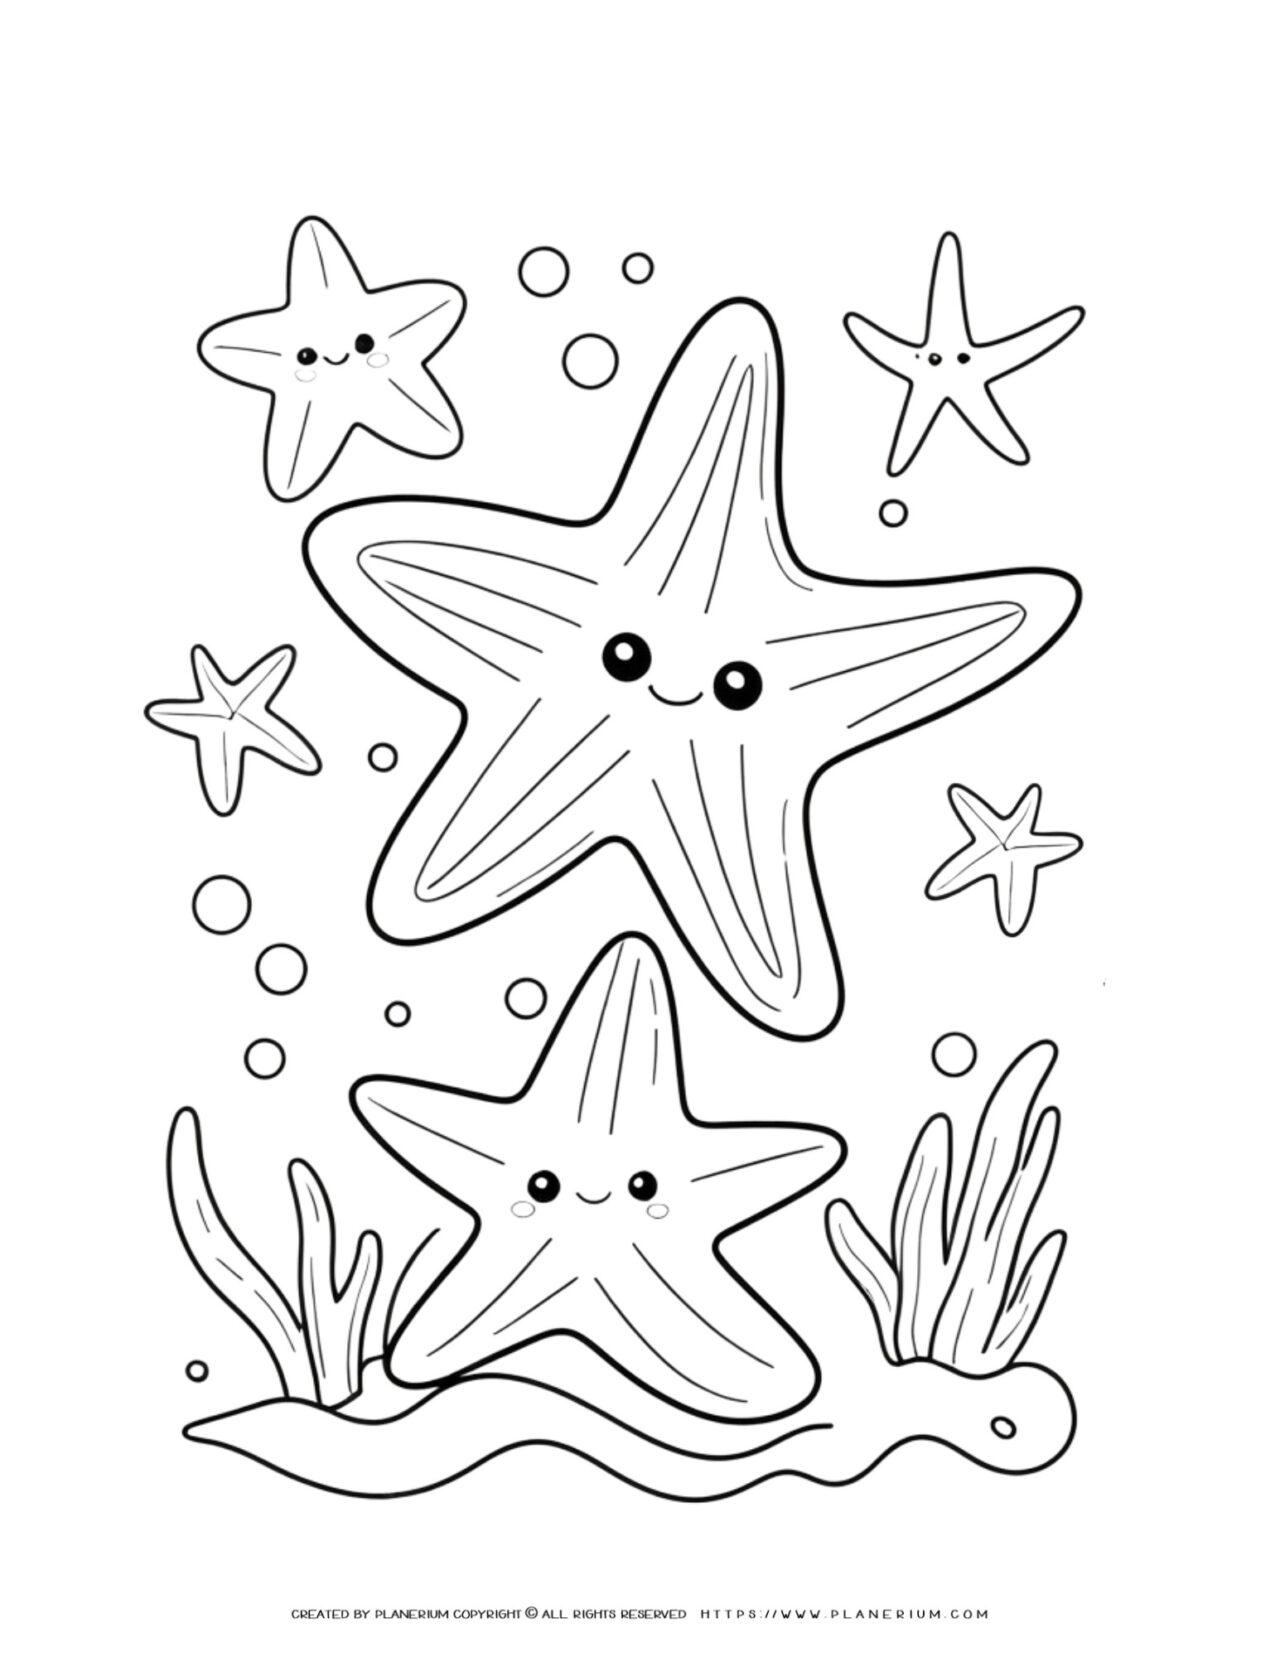 Coloring-page-featuring-smiling-starfish-and-seaweed